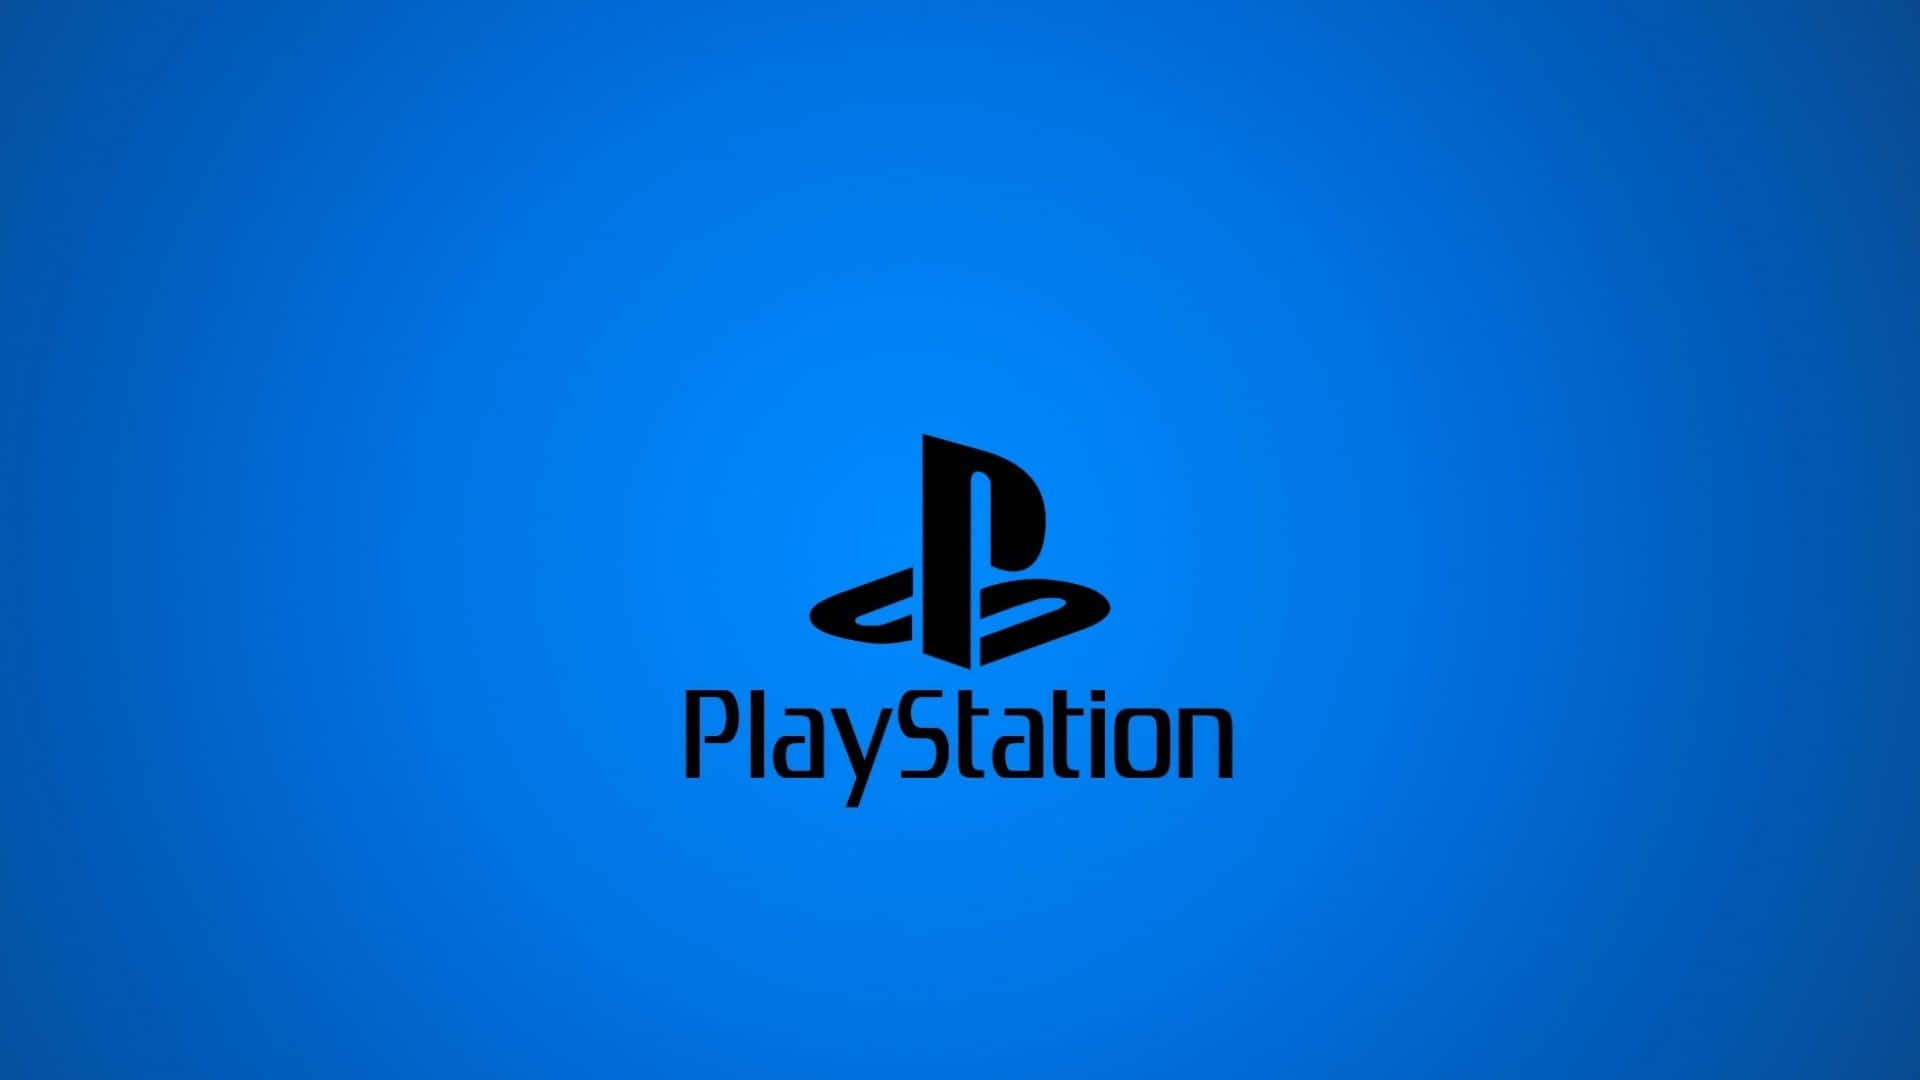 Get Ready to Play with PlayStation